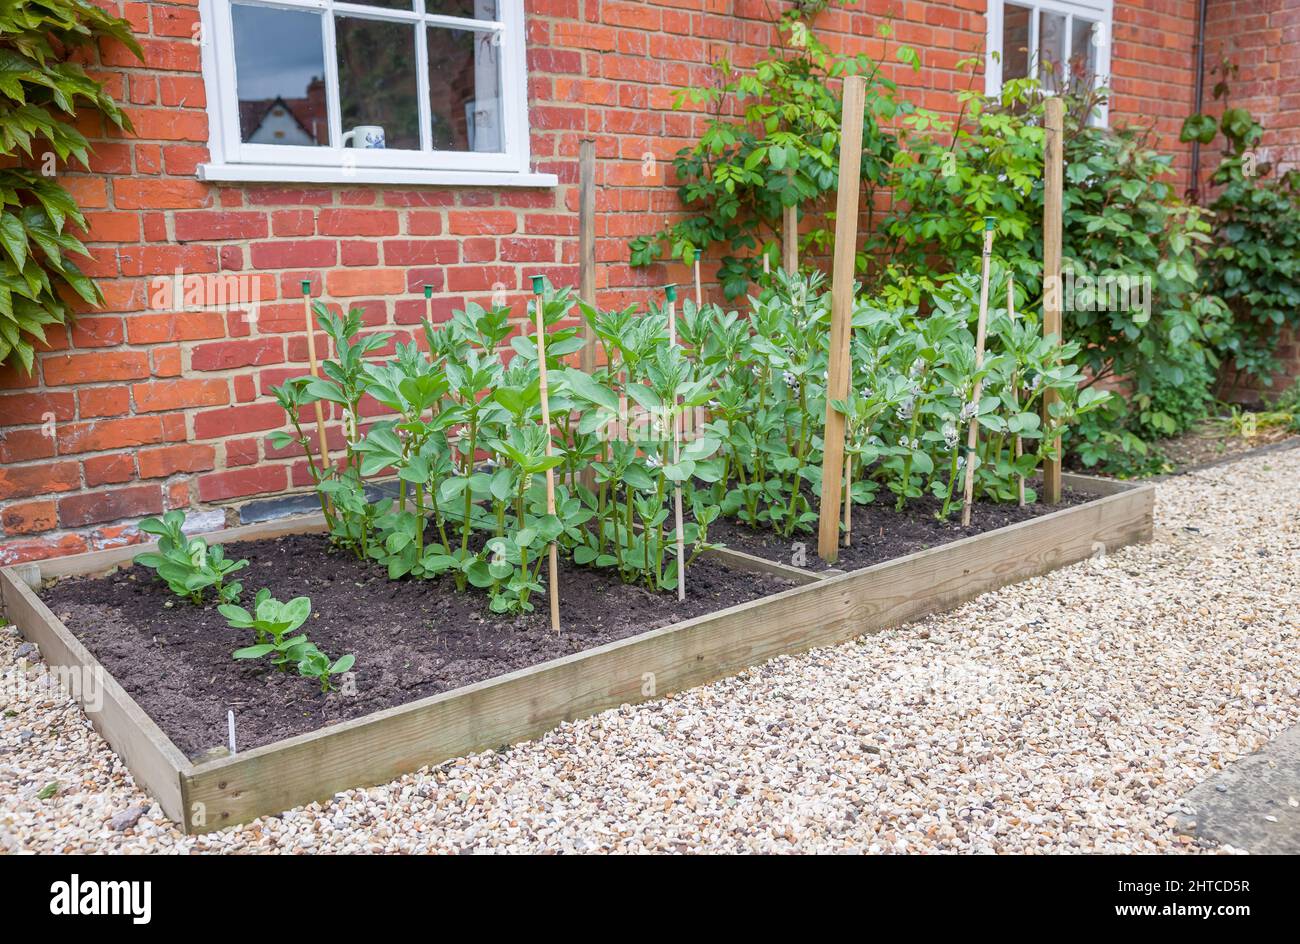 Fava bean plants (faba or broad beans) growing in a vegetable plot. English garden, UK Stock Photo